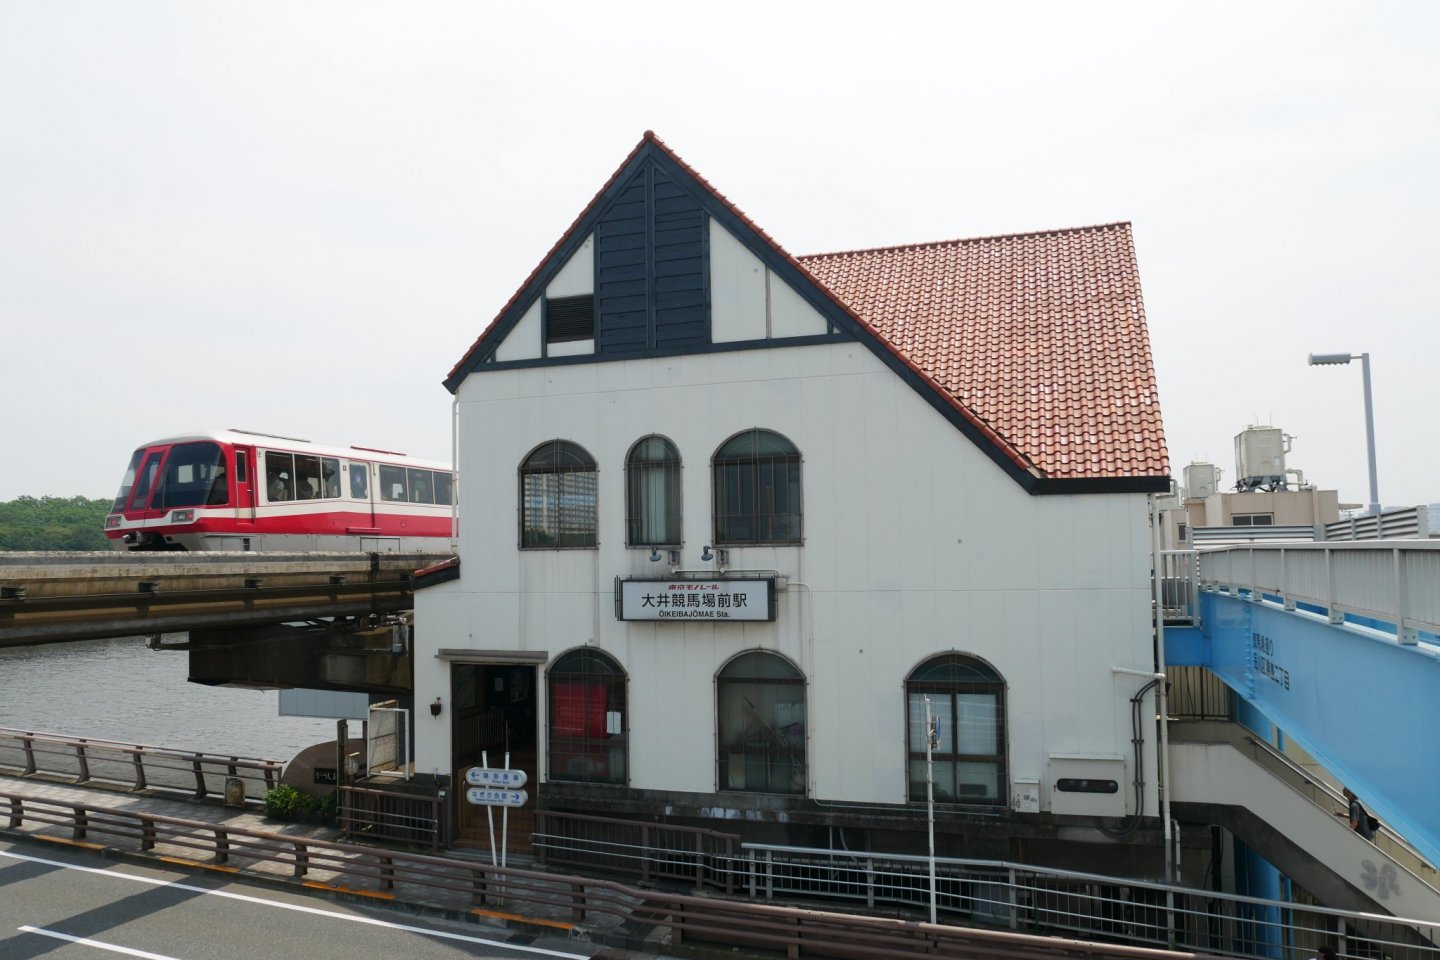 The exterior of the station building